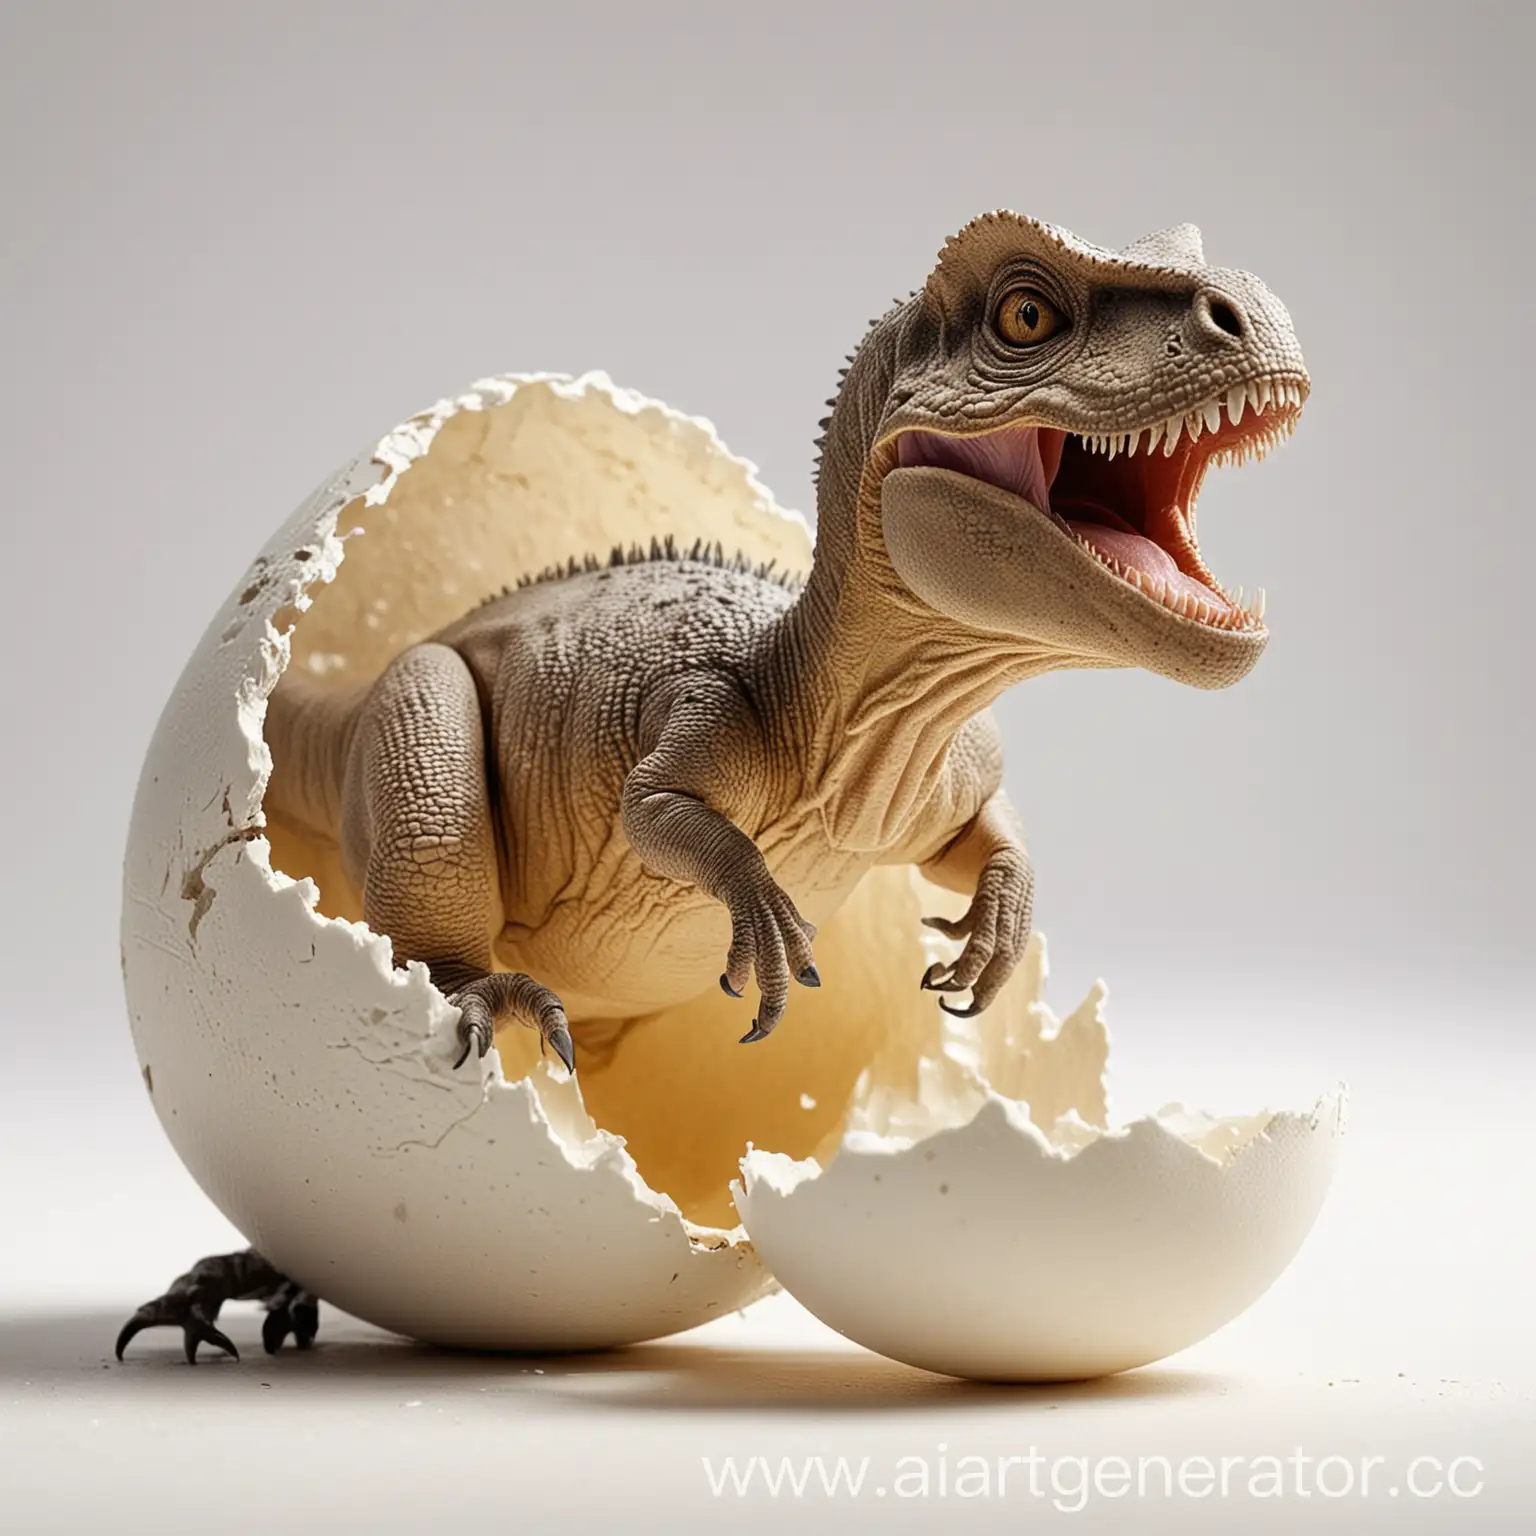 small rex dinosaur crawls out of an egg, white background